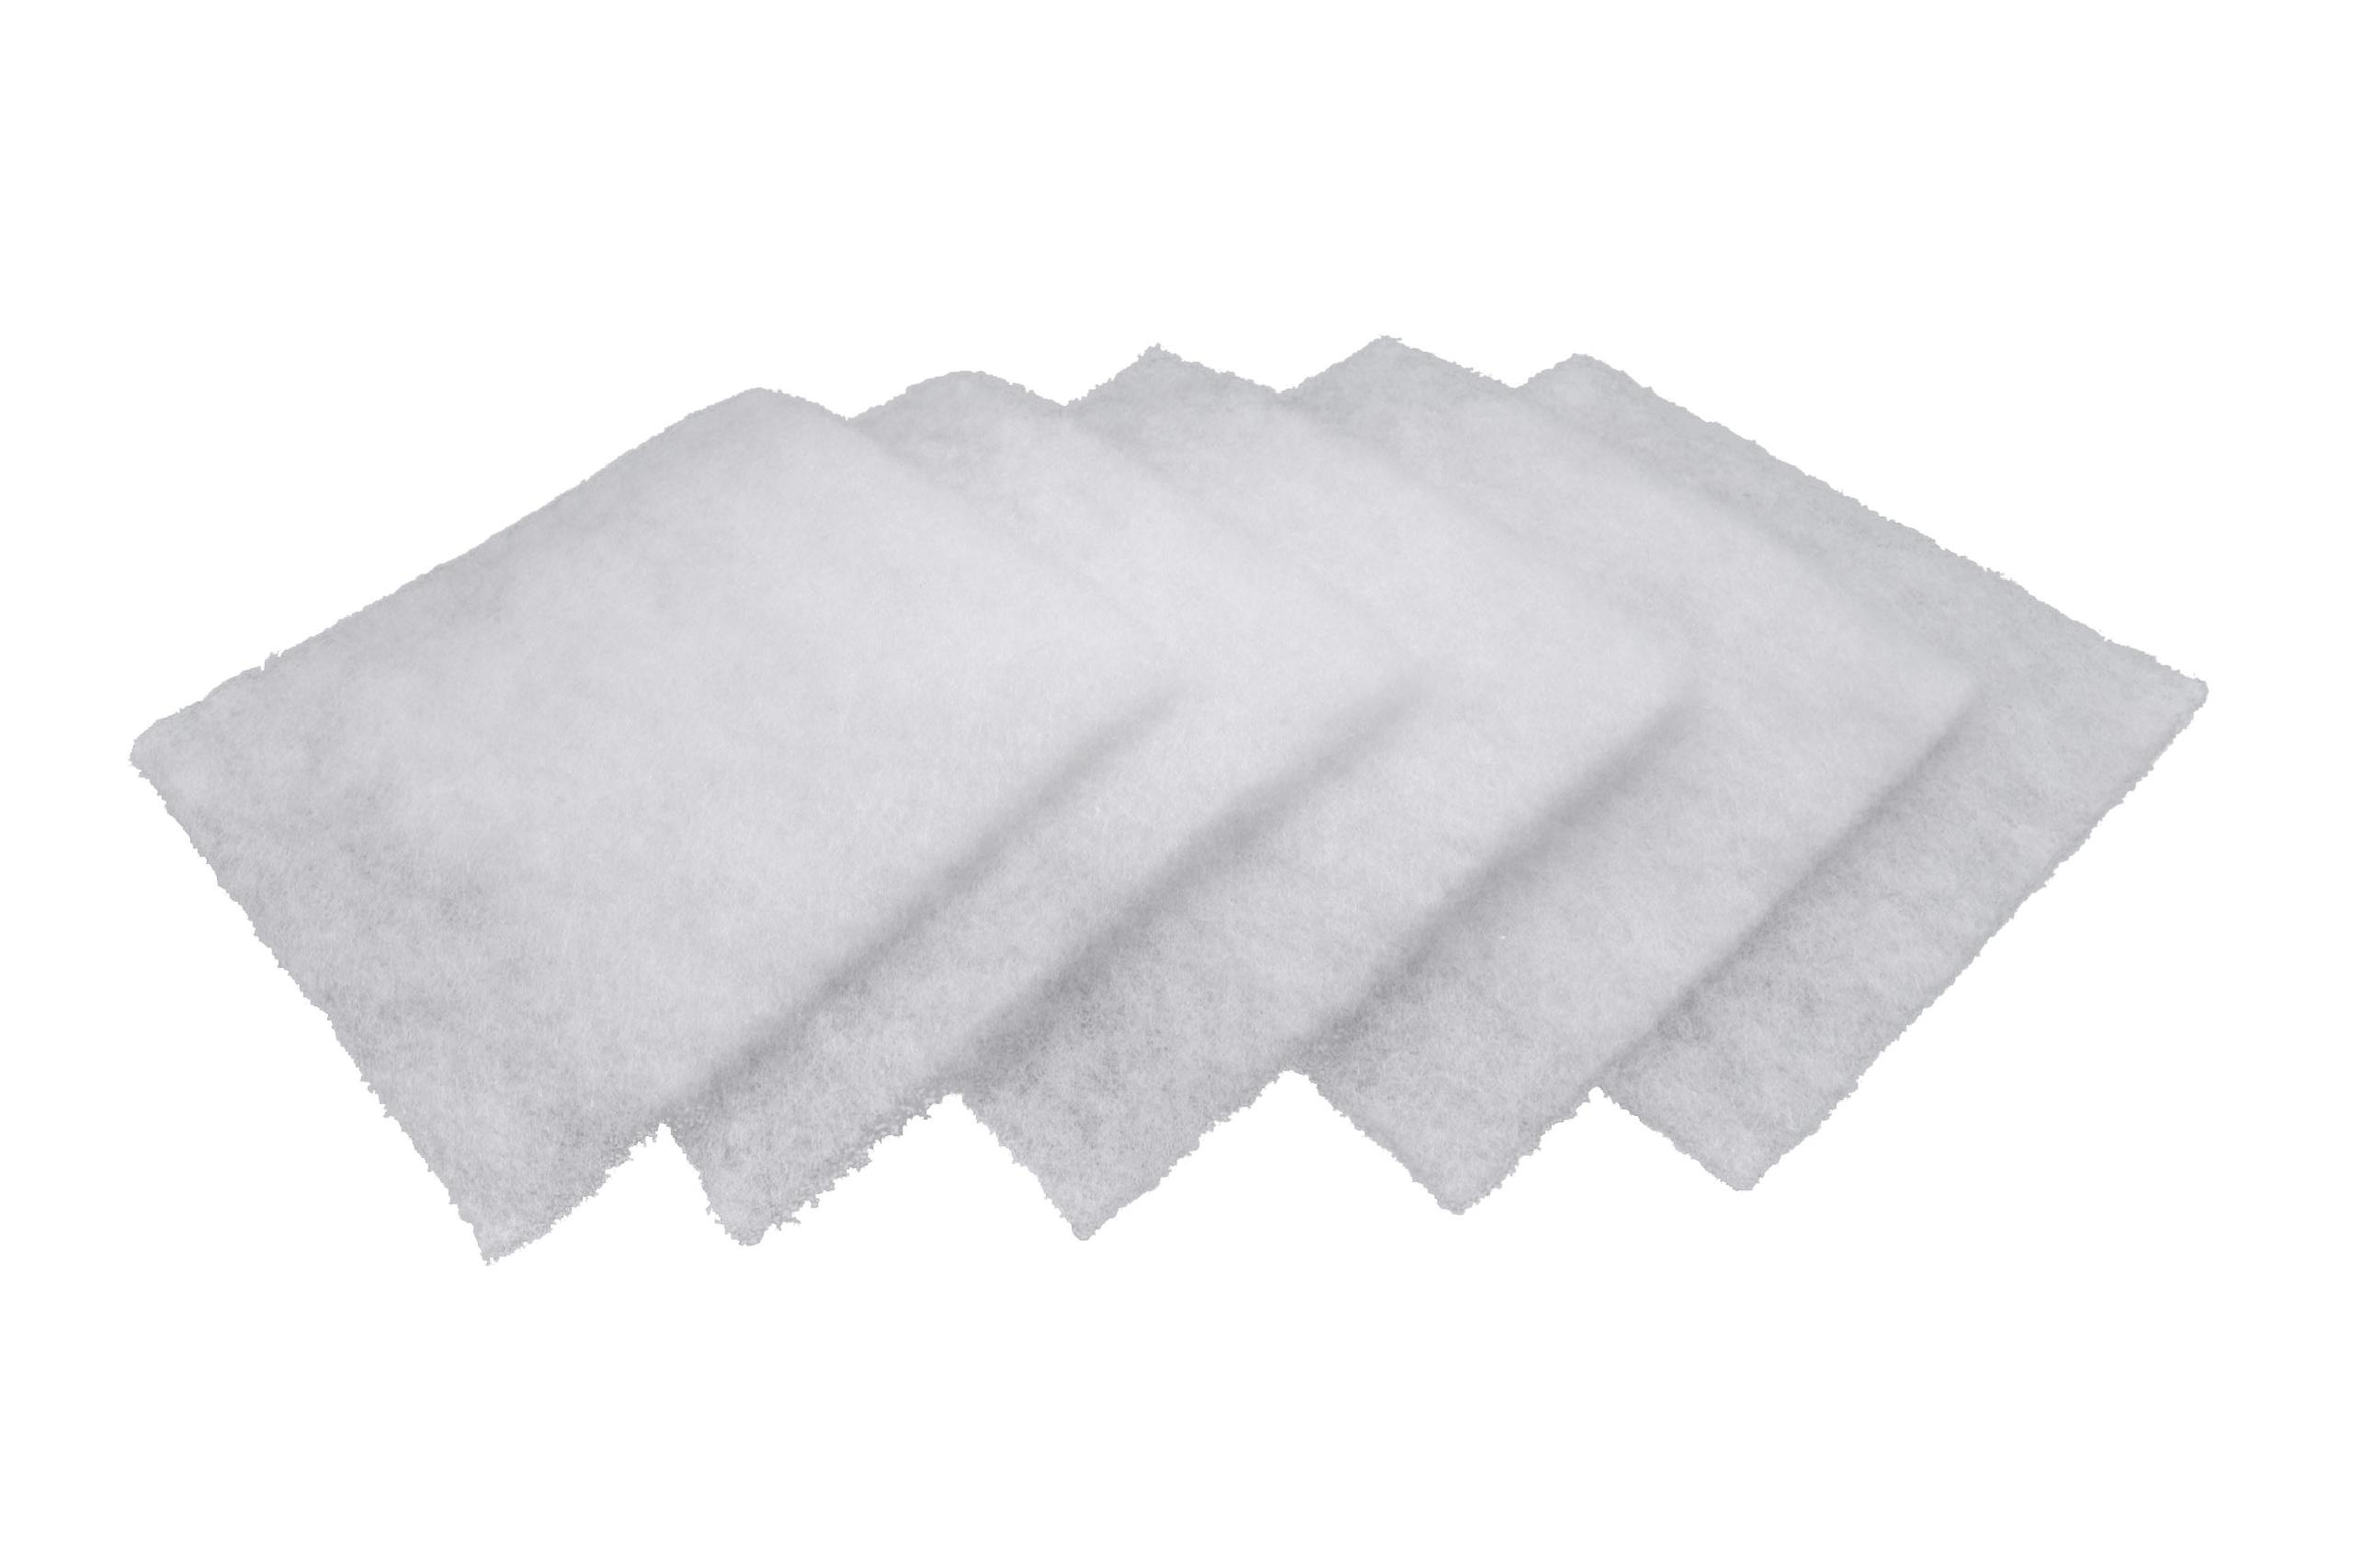 vhbw 5x Air Filter Replacement for Lunos 034185, 2/FSA for Vent, Condensation Damp Control Ventilator - White